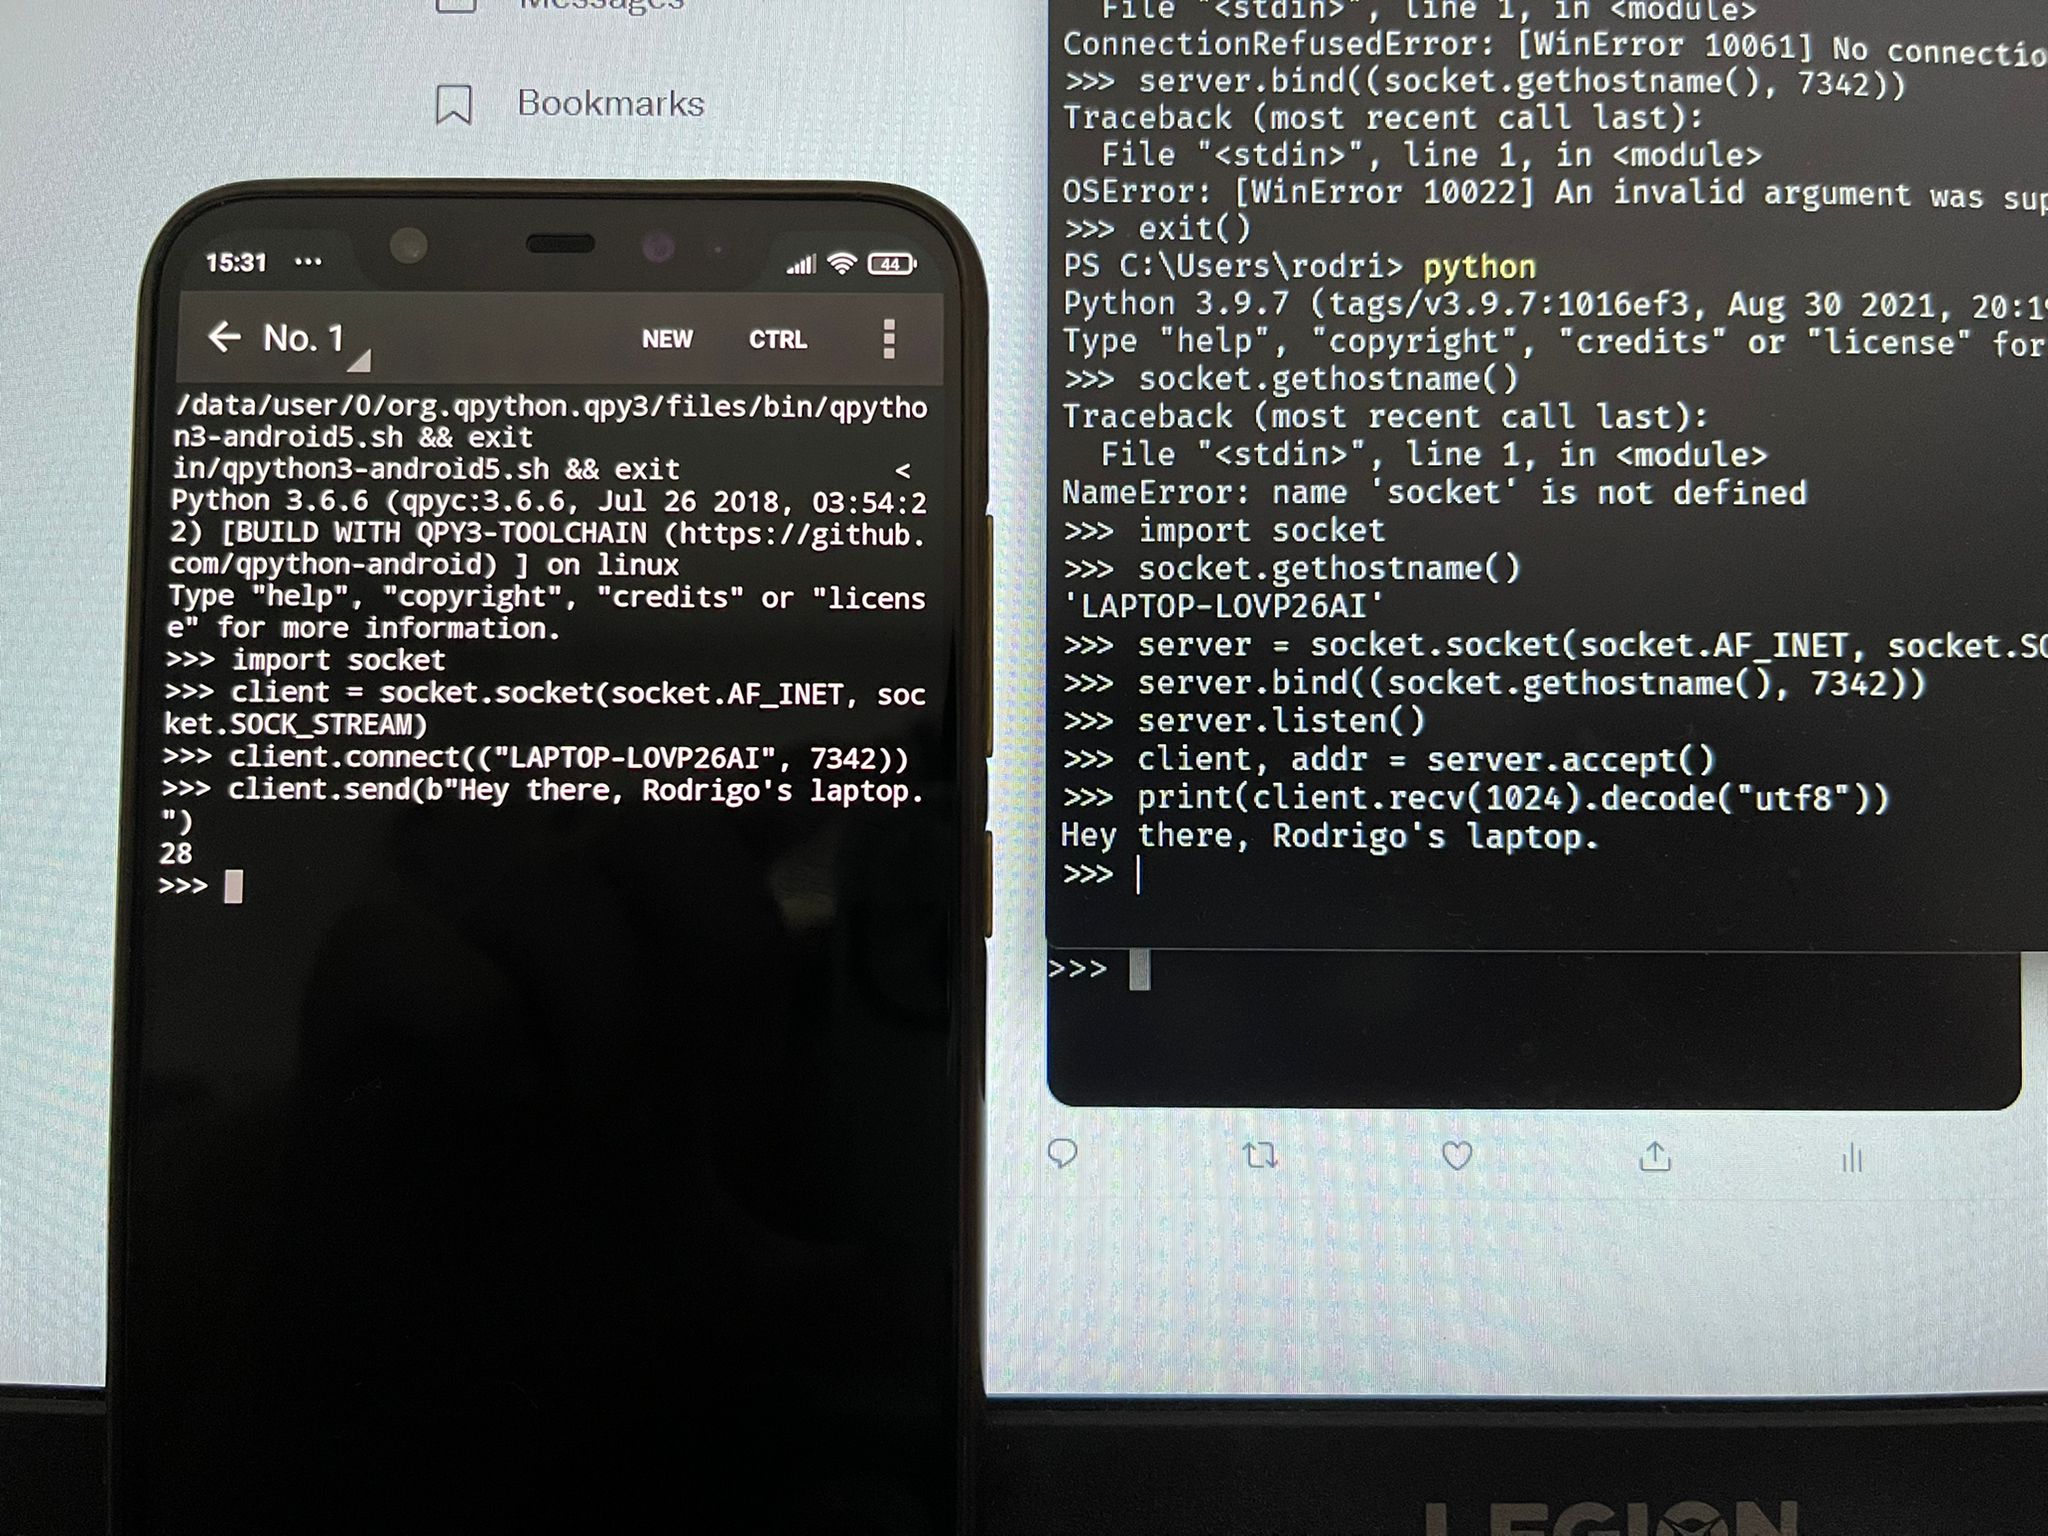 A picture of my phone, next to my laptop, showing Python REPLs in both devices, with evidence that the client-server socket connection was established successfully, by making use of socket programming in Python.